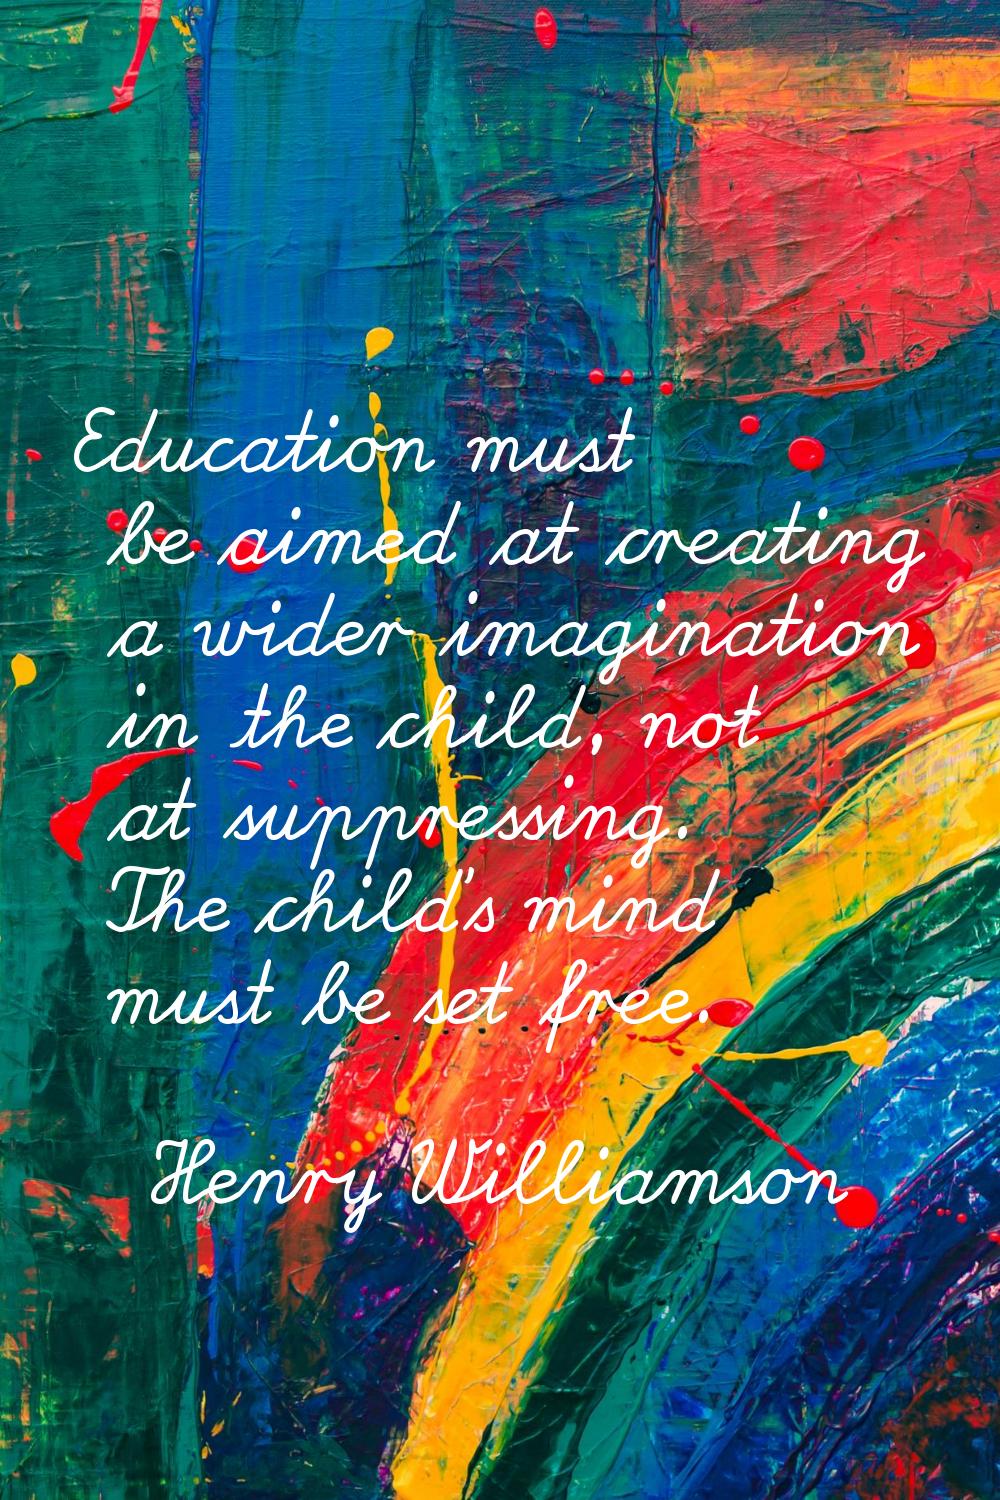 Education must be aimed at creating a wider imagination in the child, not at suppressing. The child